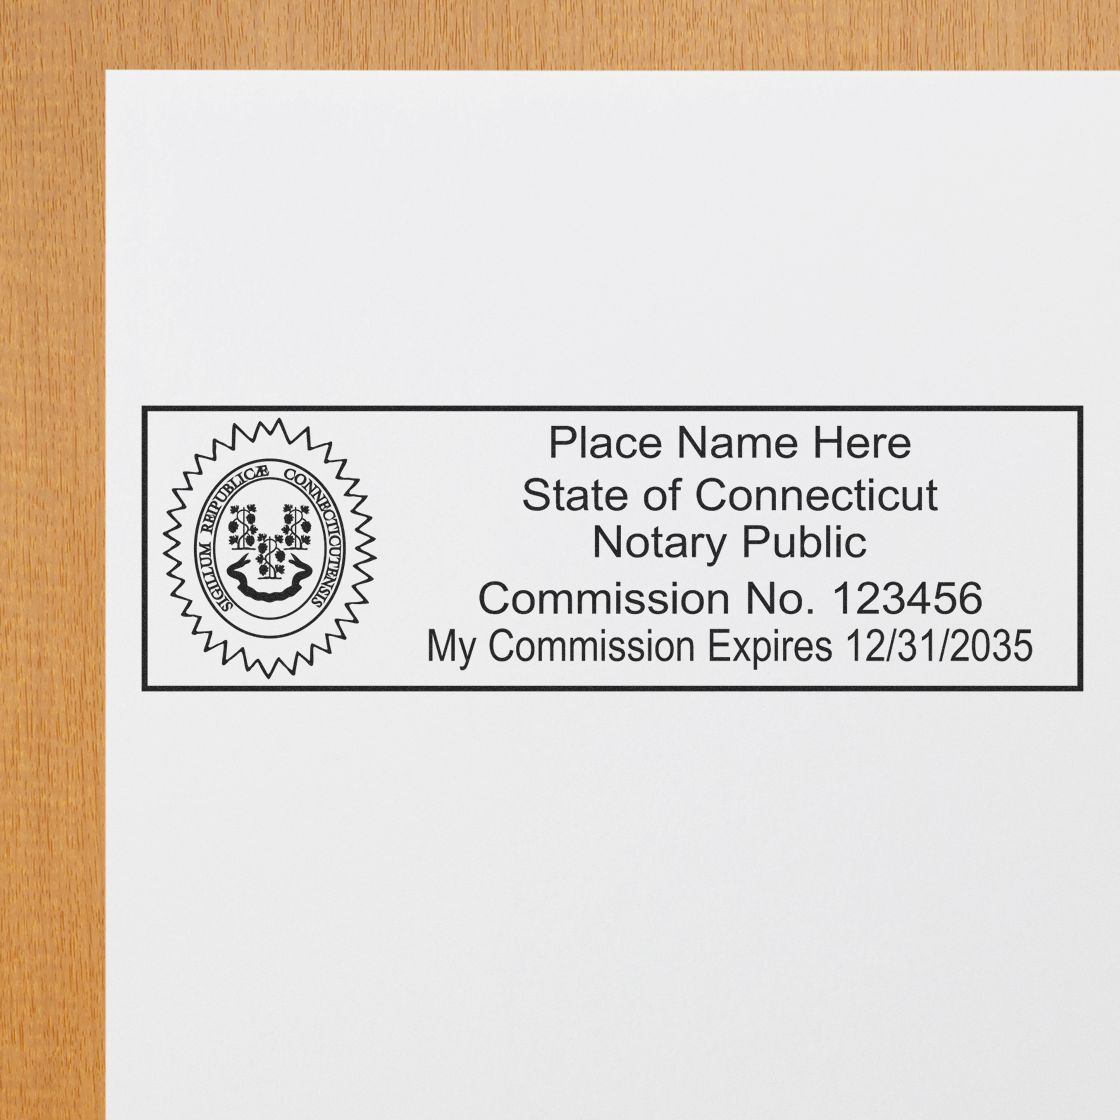 The Super Slim Connecticut Notary Public Stamp stamp impression comes to life with a crisp, detailed photo on paper - showcasing true professional quality.